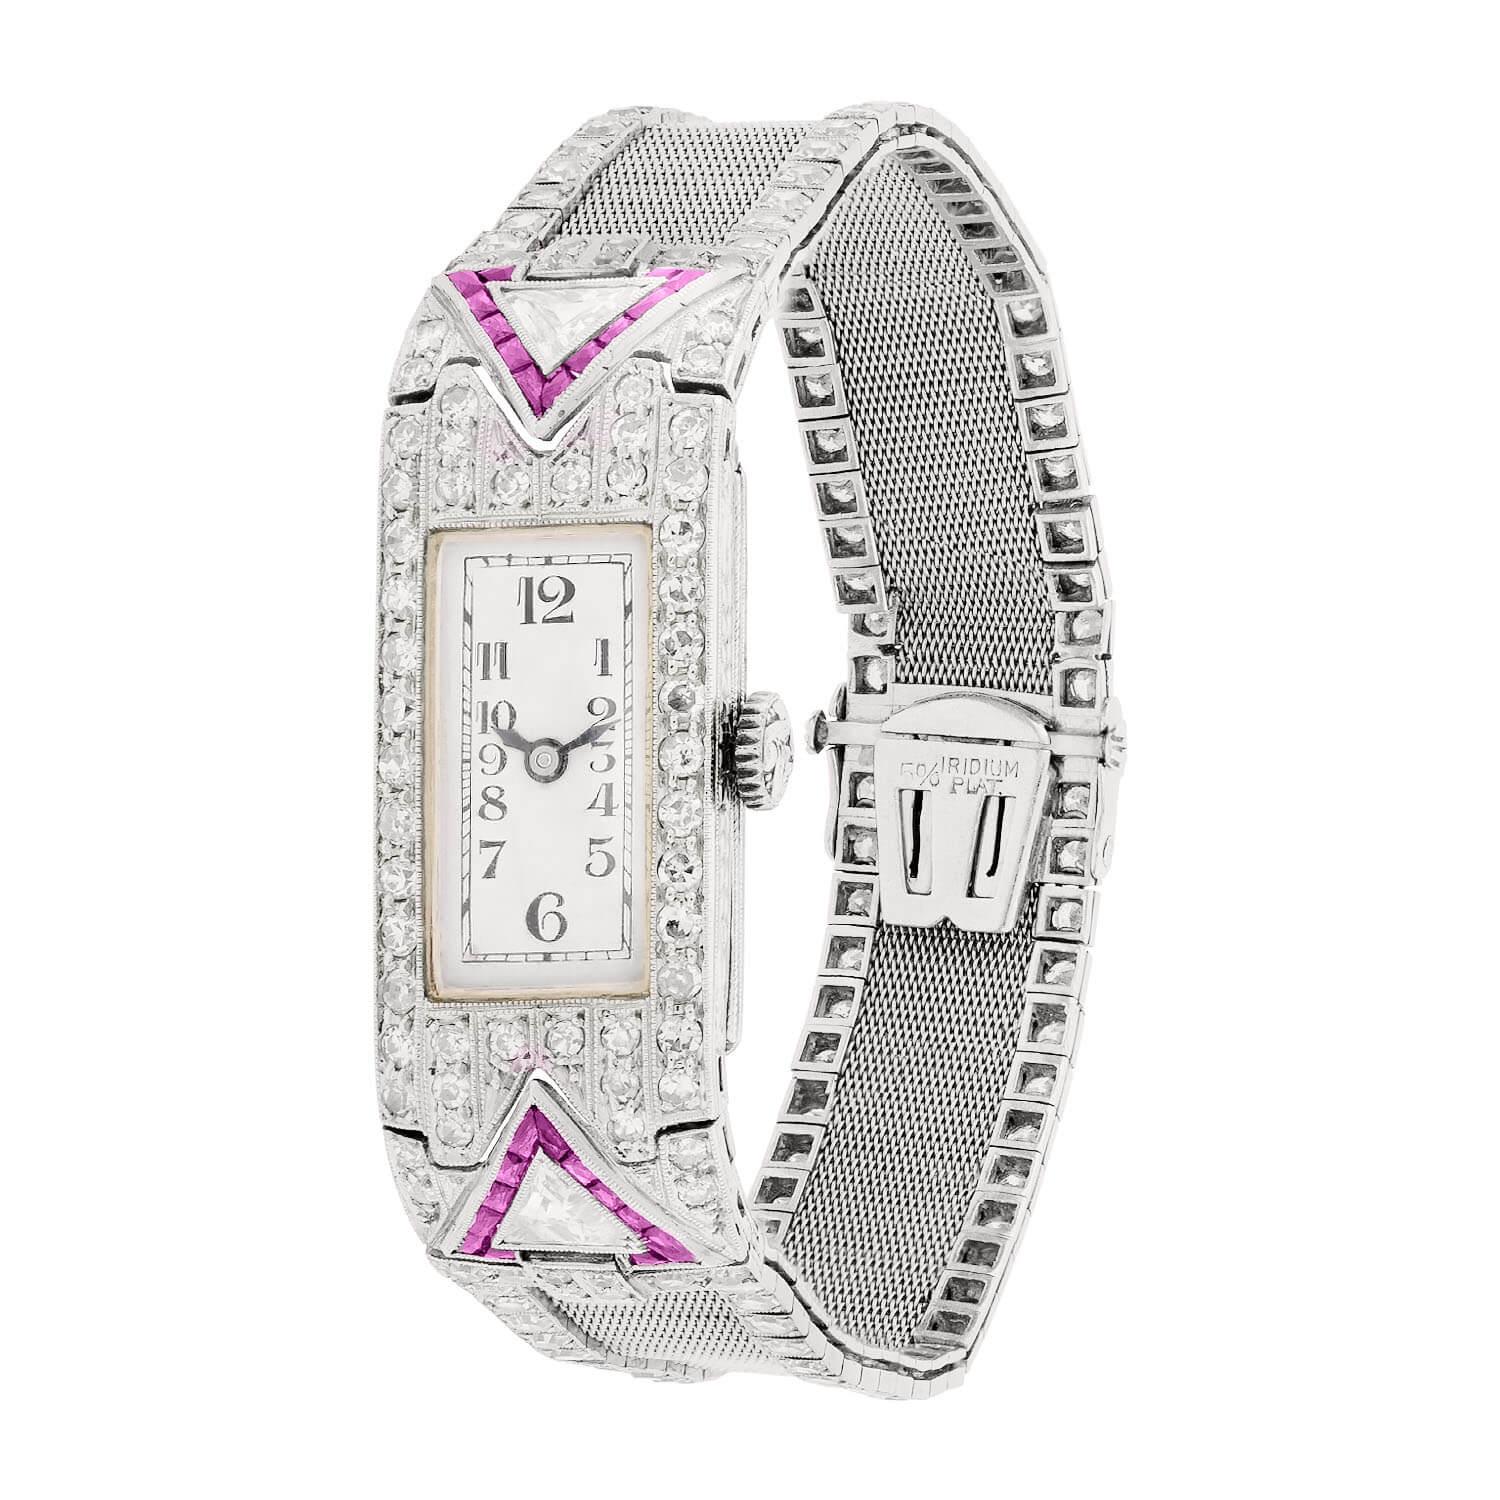 A fabulous platinum, diamond, and ruby Glycine watch from the Art Deco (ca1920s) era! This gorgeous watch has a rectangle-shaped watch face, which is surrounded by a wonderful and feminine design that is encrusted with sparkling diamonds and